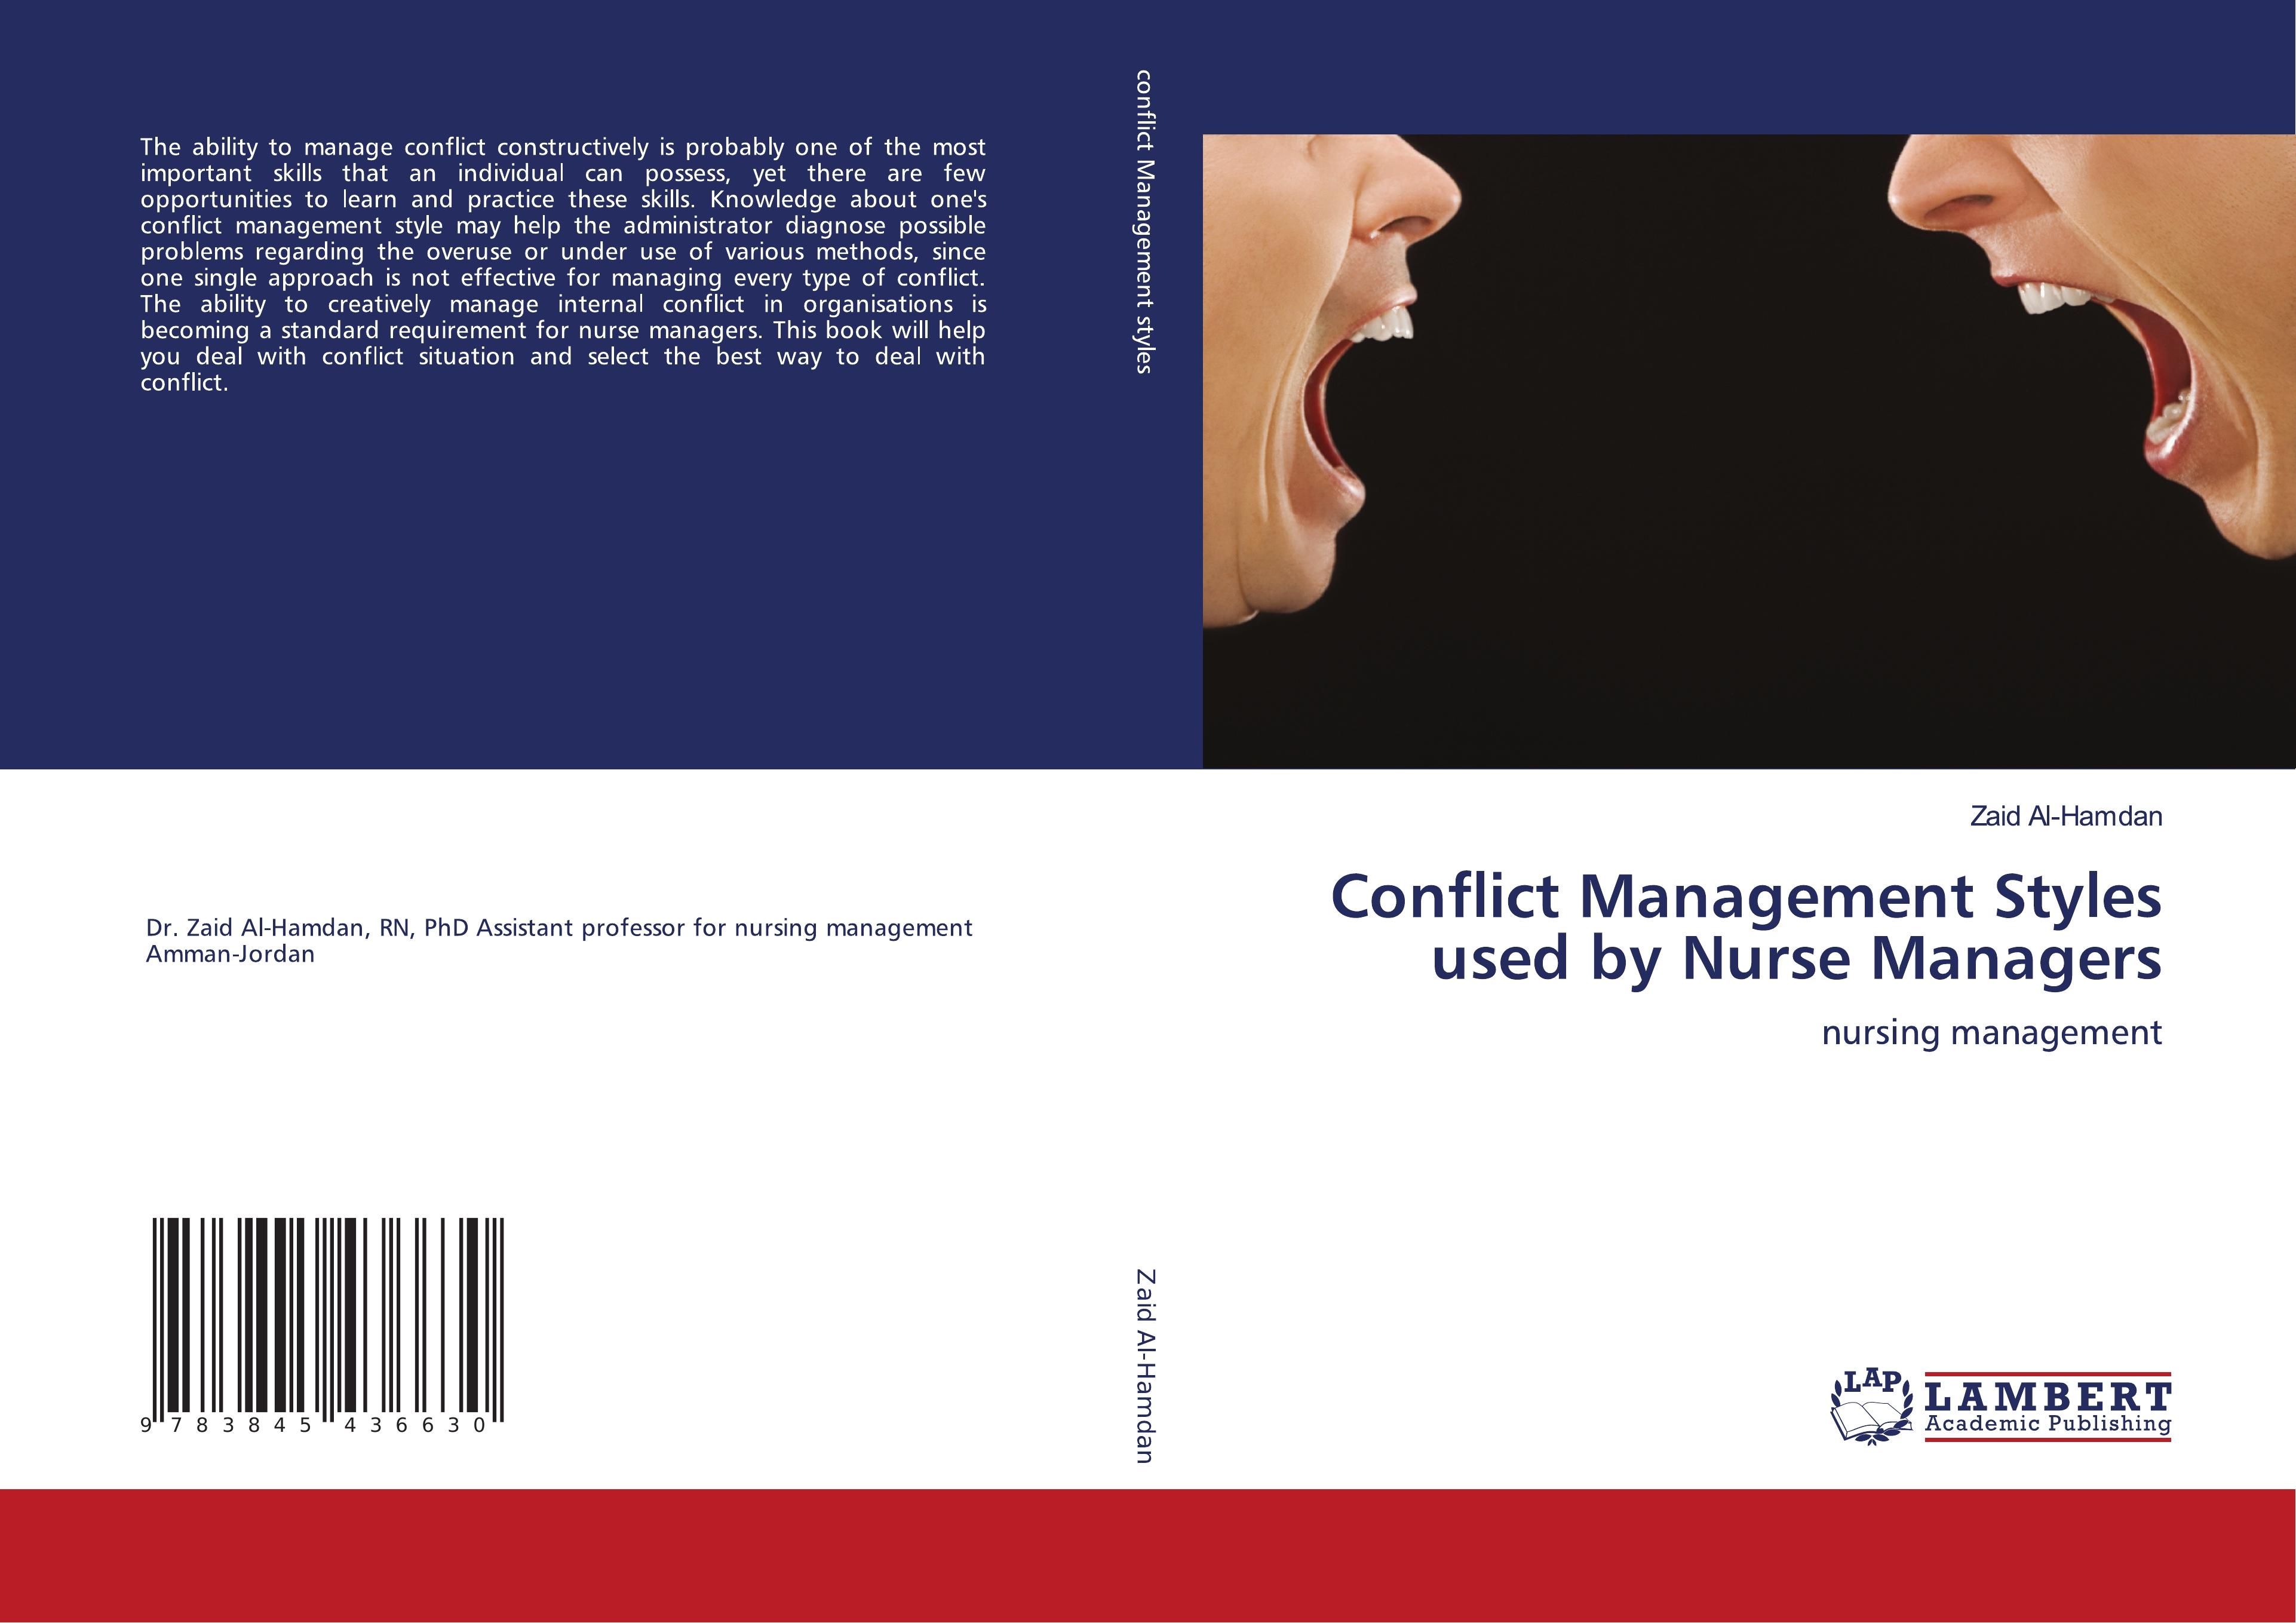 Conflict Management Styles used by Nurse Managers - Zaid Al-Hamdan